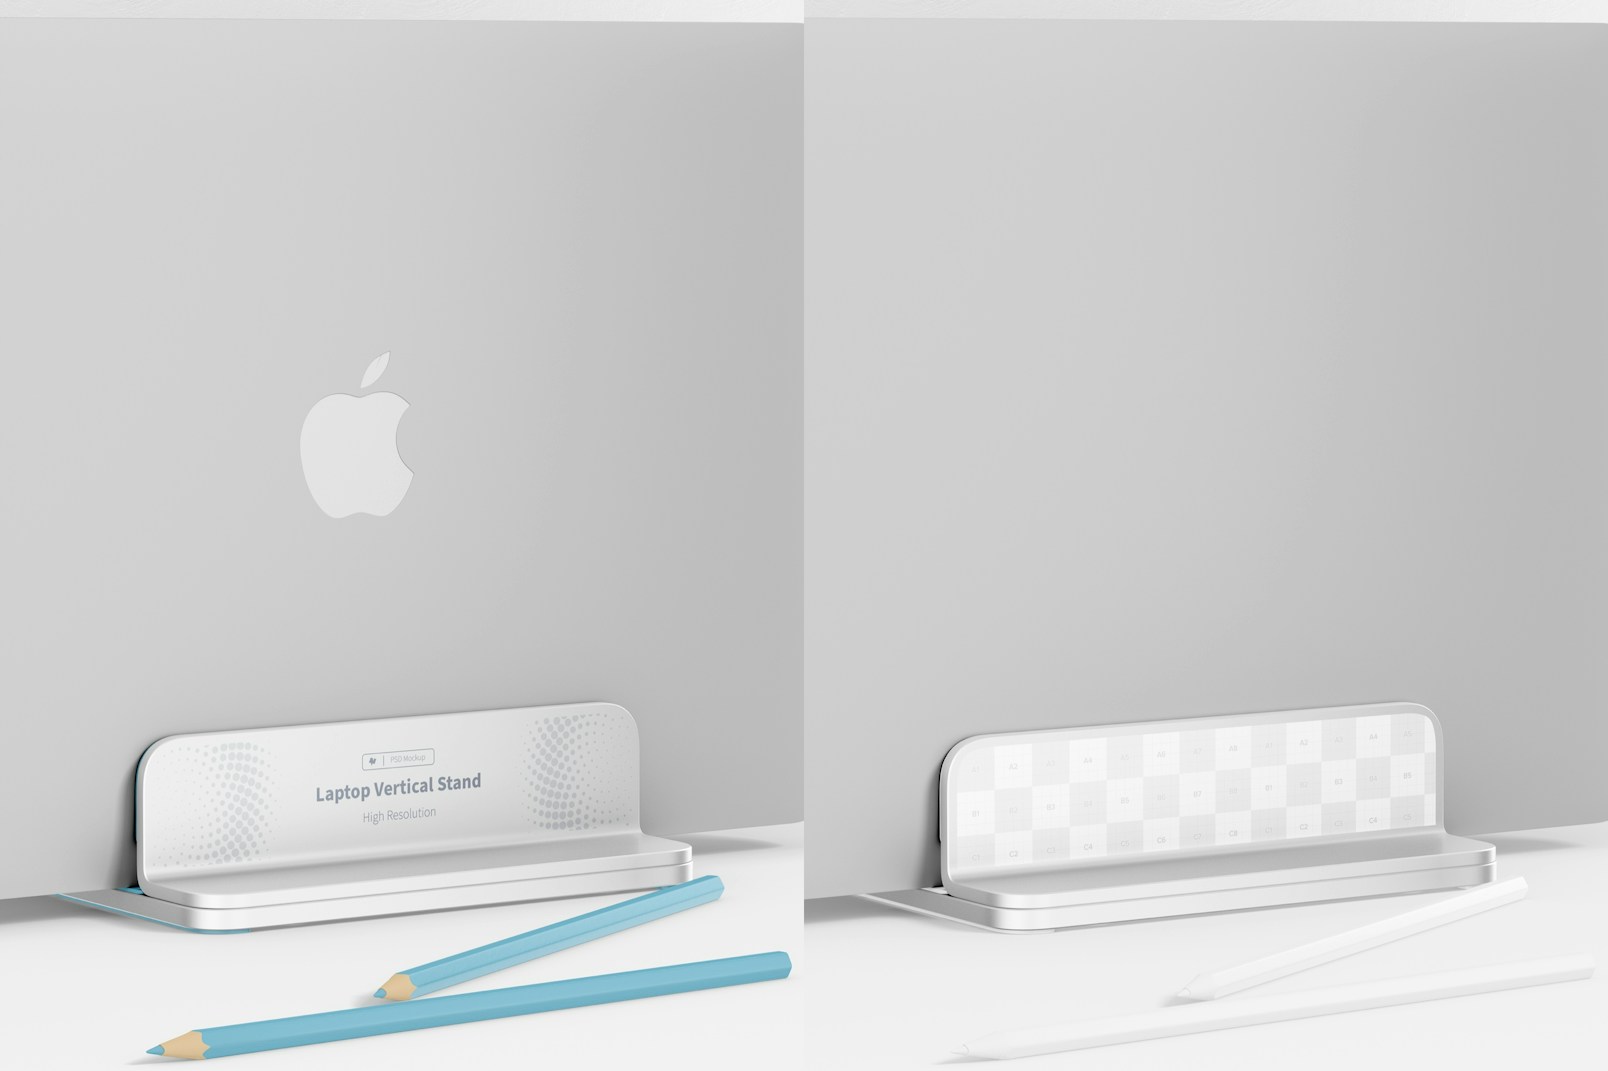 Laptop Vertical Stand Mockup, Perspective View